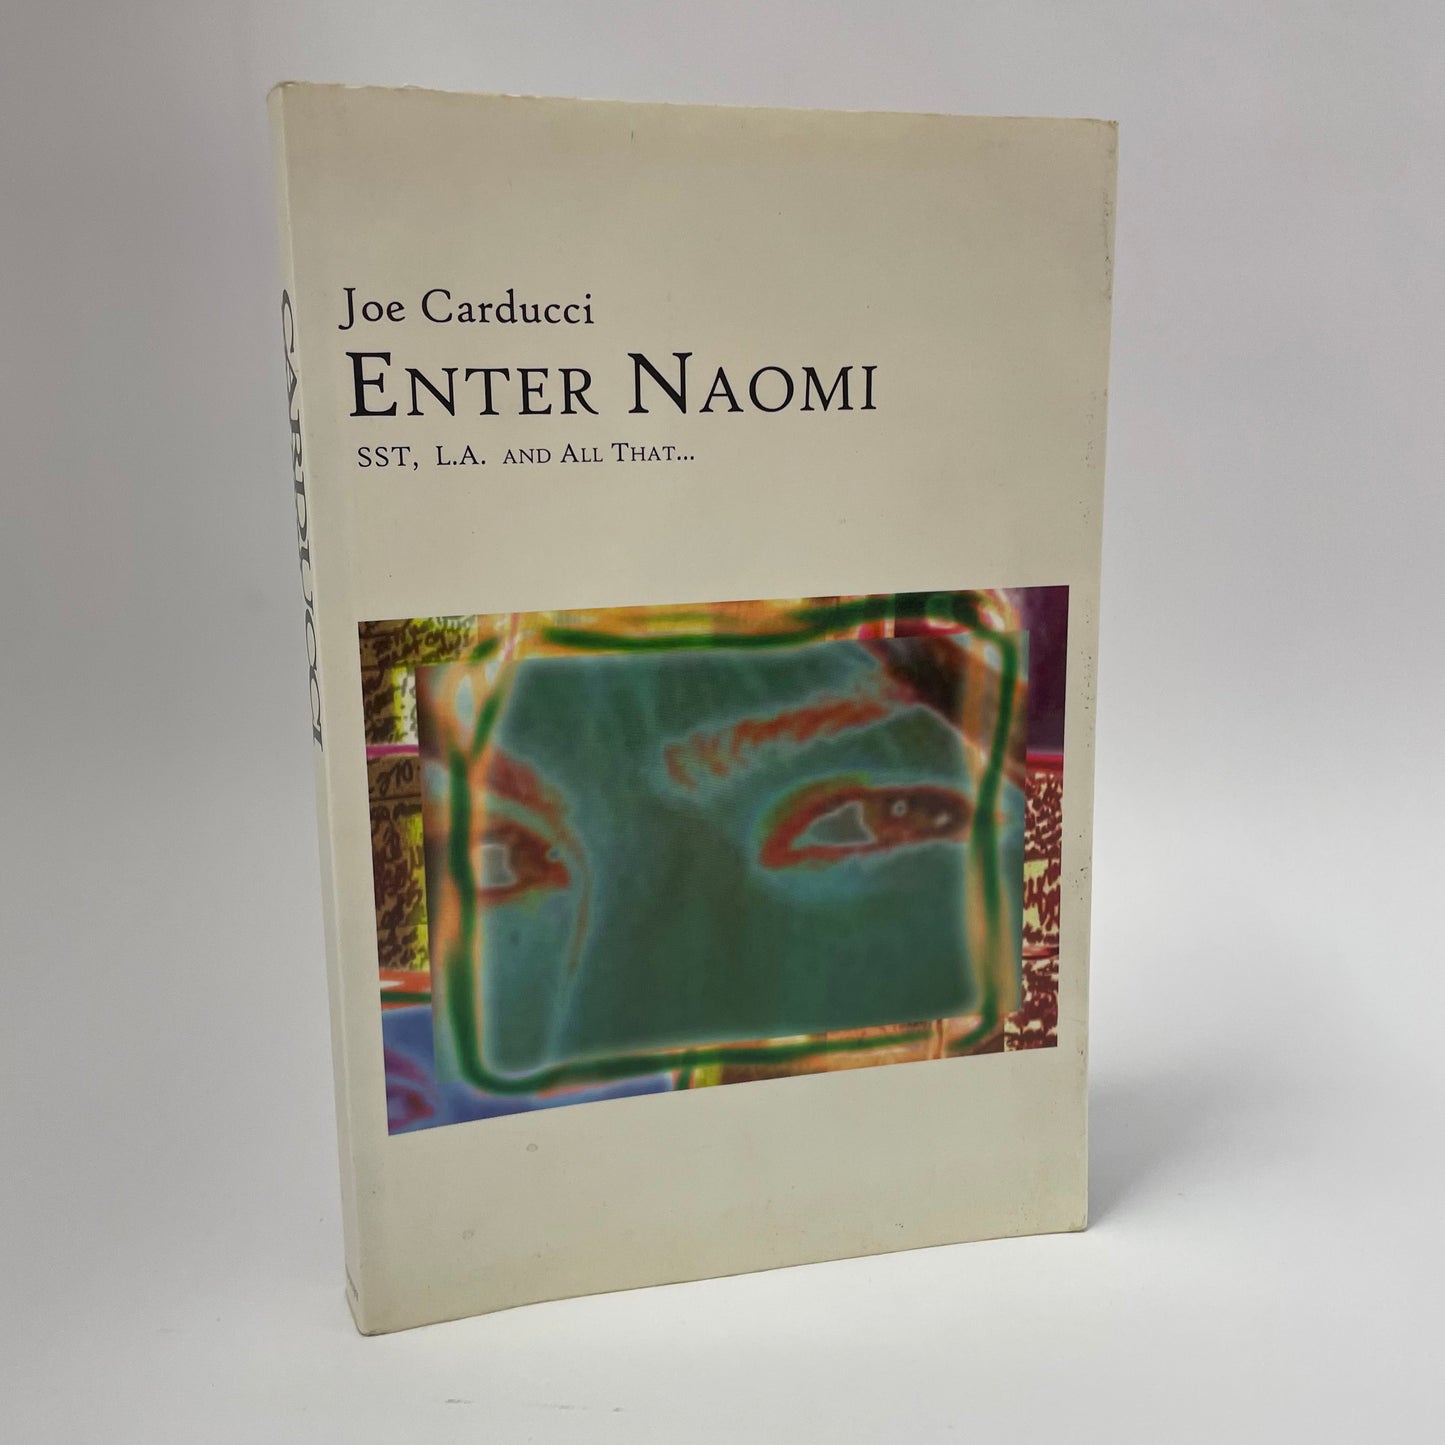 Joe Carducci - Enter Naomi: SST, L.A. and all that